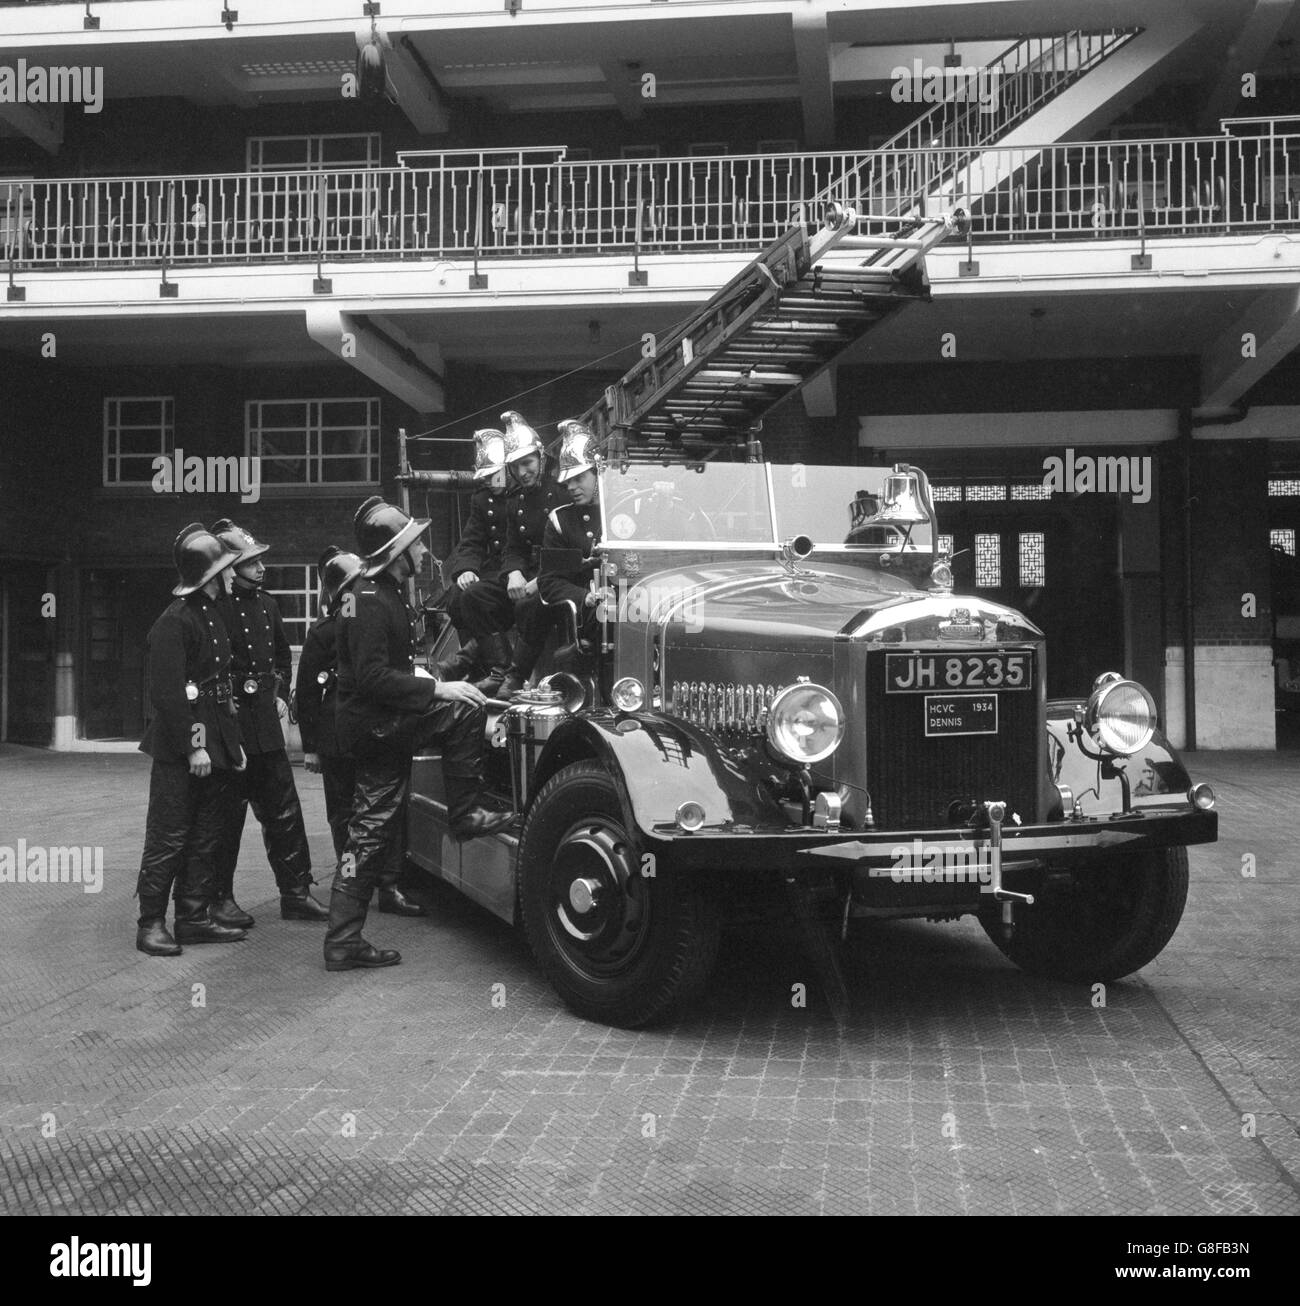 A 1934 vintage fire engine, with owner Paul Adorian at the wheel, leaves London Fire Brigade headquarters on the Albert Embankment at the start of a return trip to paris. He is making the run to celebrate the 300th anniversary of the Great Fire of London and the centenary of the London Fire Brigade's formation. Accompanying Mr Adorian are Ray Stacey and Nigel Howes. Stock Photo